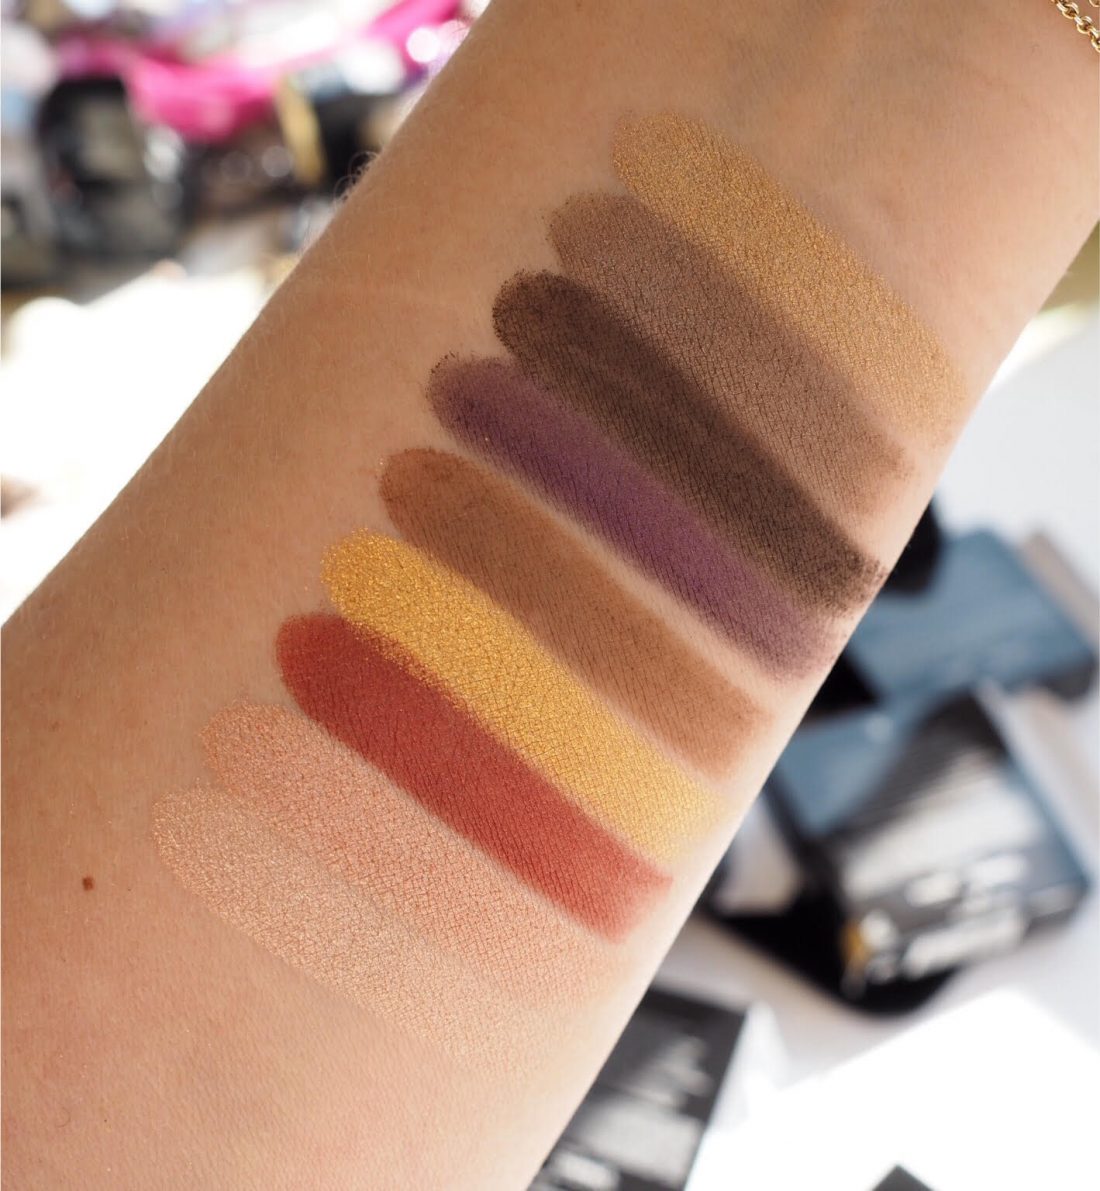 Chanel Verderame Ombre Premiere Review, Photos, Swatches